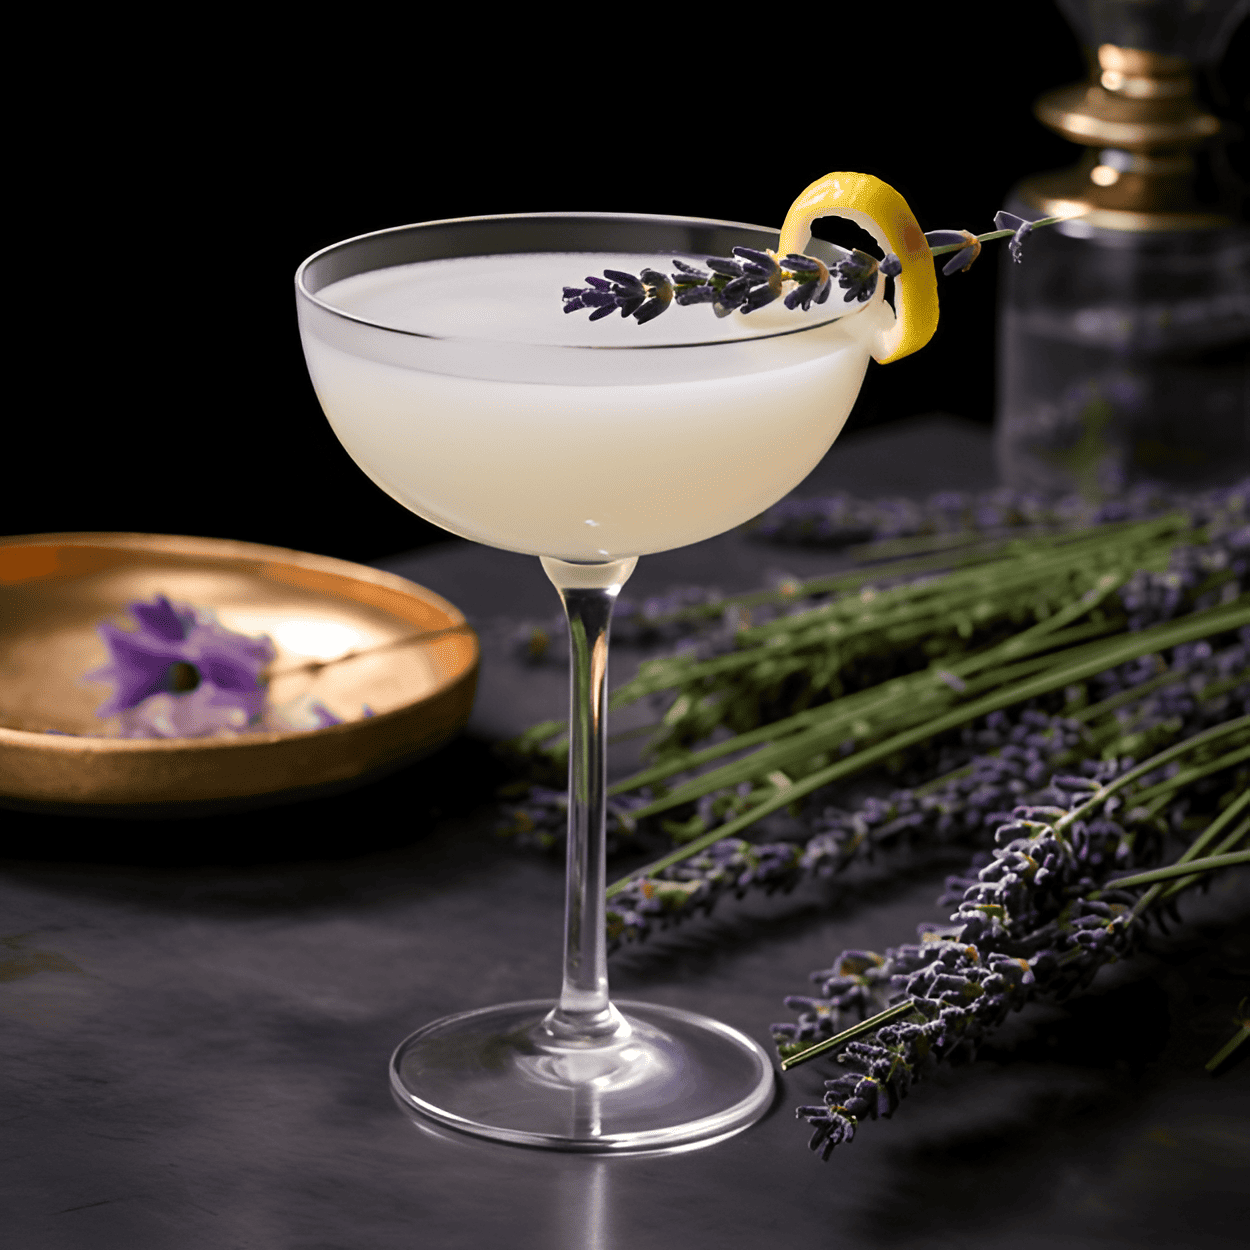 Pillow Talk Cocktail Recipe - The Pillow Talk cocktail is a delightful mix of sweet, sour, and floral notes. The sweetness of the honey is balanced by the tartness of the lemon, while the gin adds a strong, botanical flavor. The lavender garnish adds a subtle floral note, making this cocktail a complex and enjoyable experience.